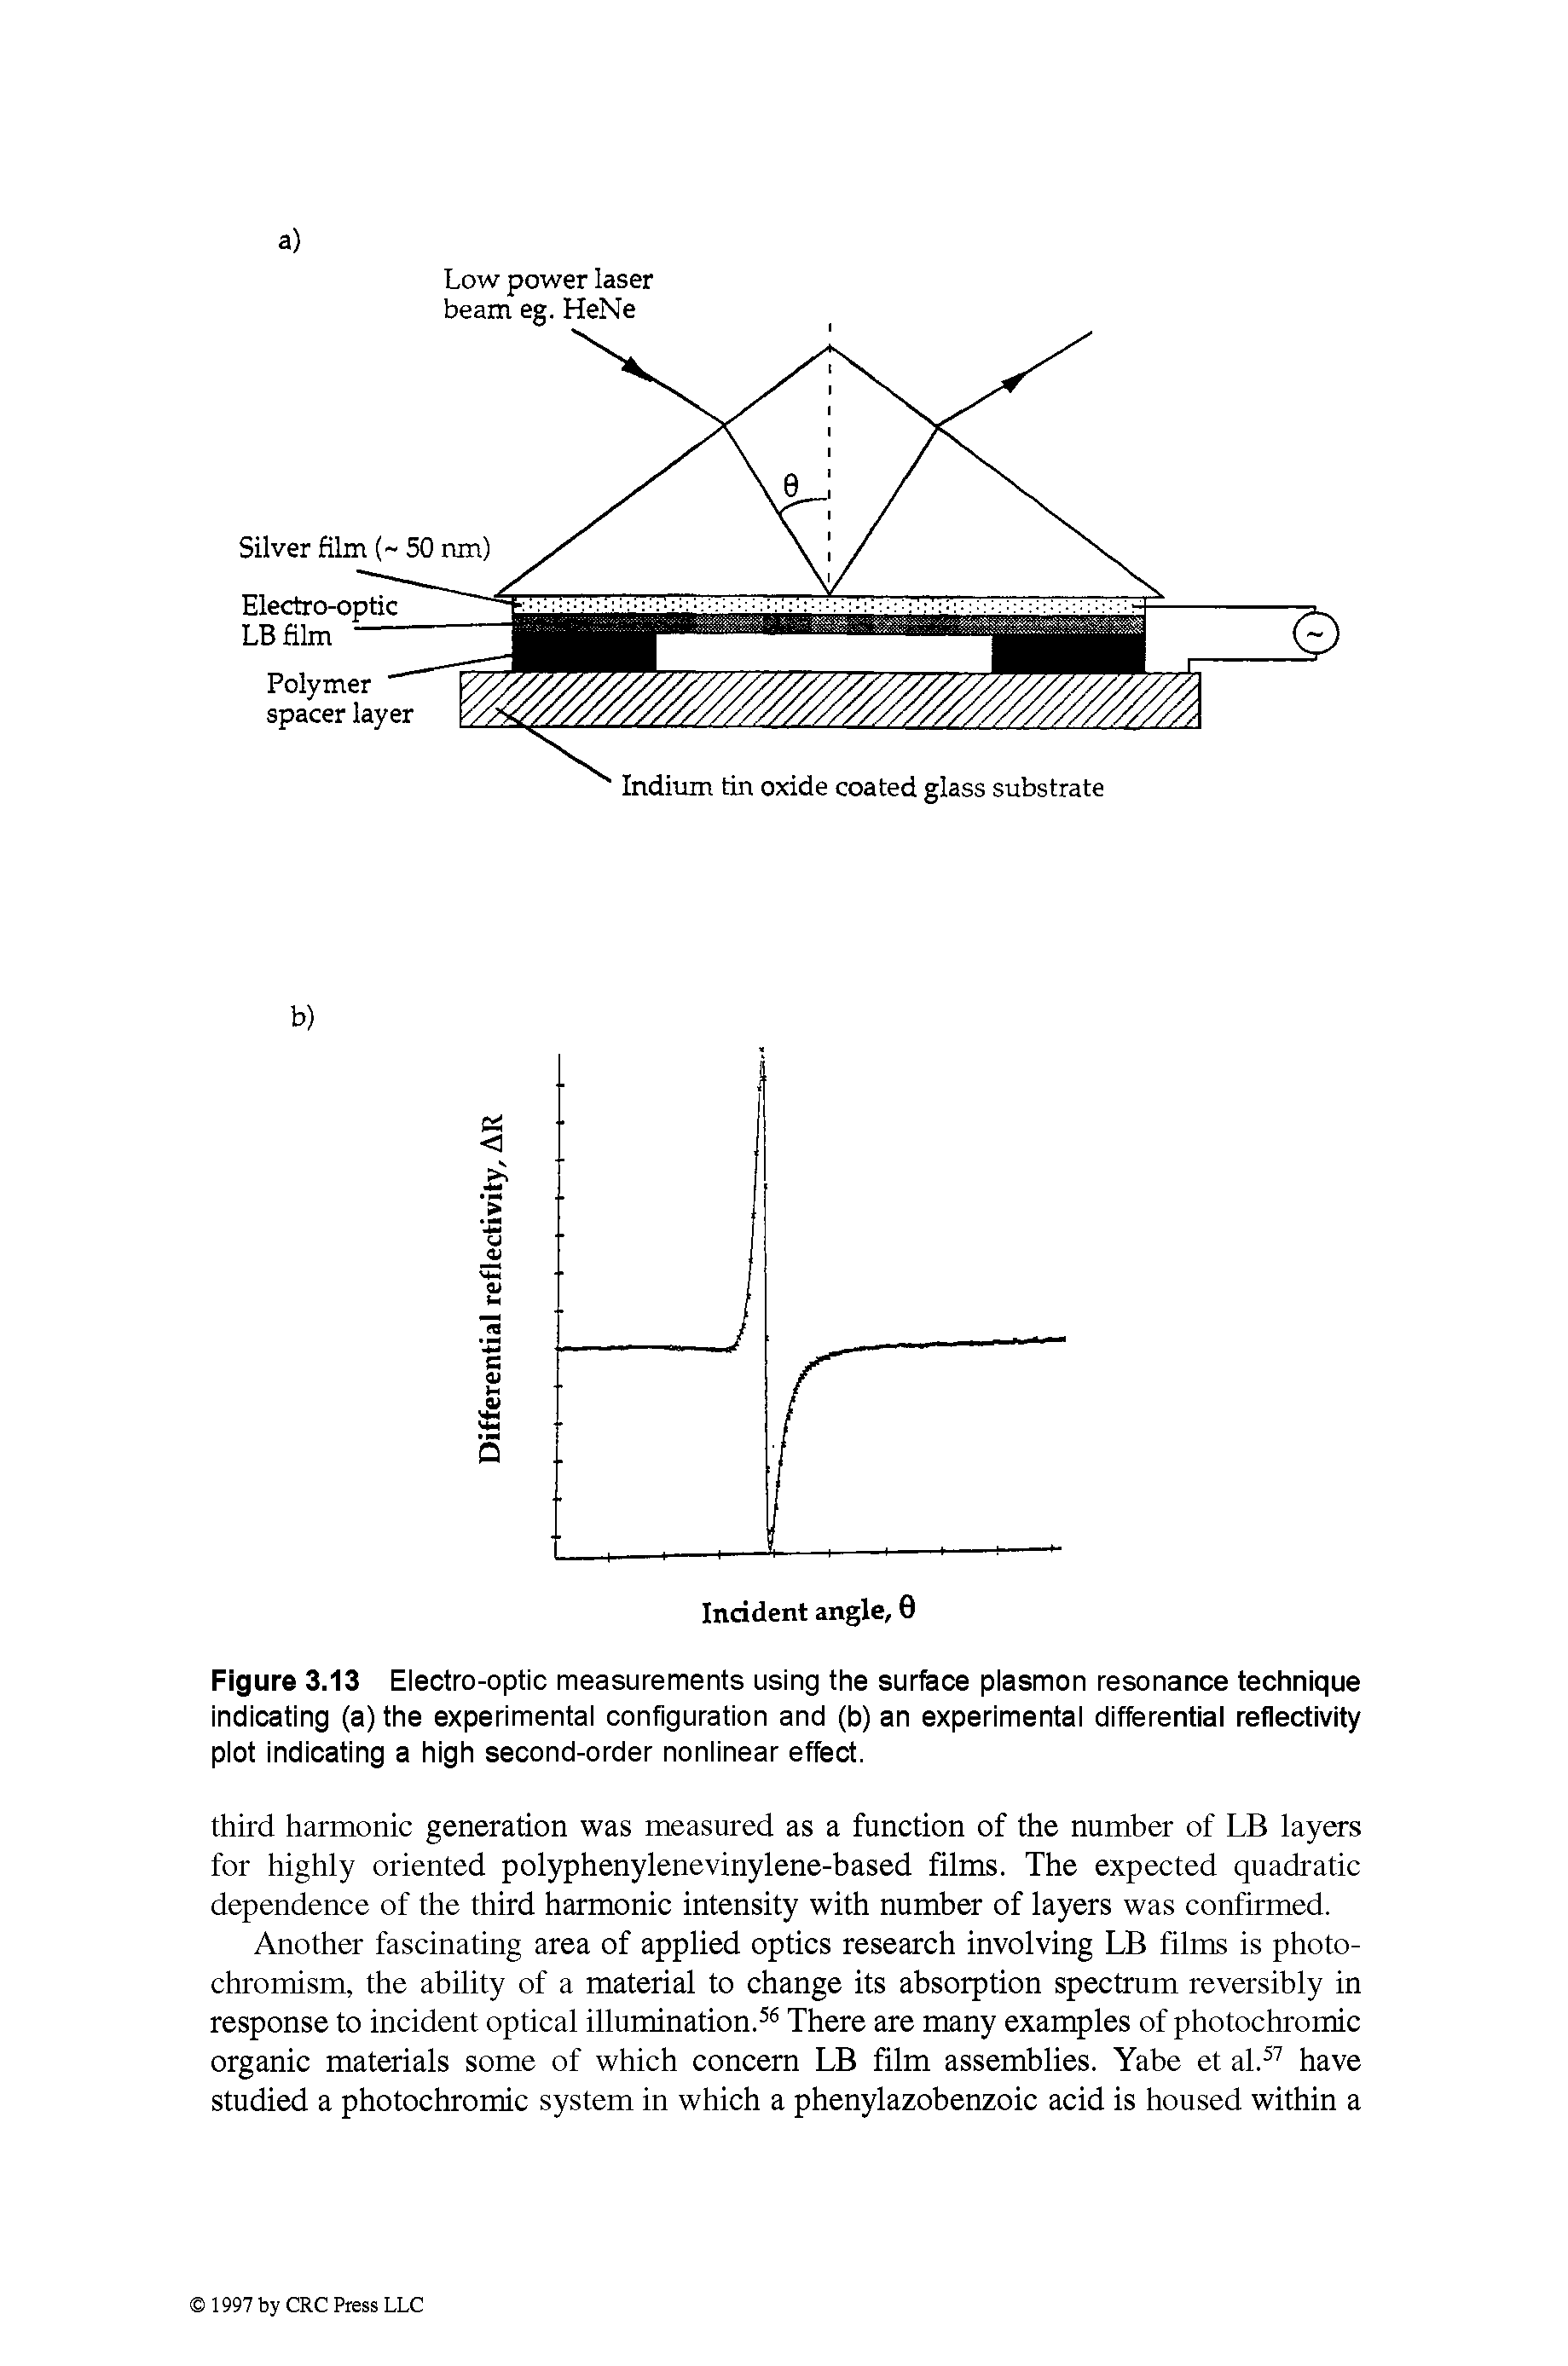 Figure 3.13 Electro-optic measurements using the surface plasmon resonance technique indicating (a) the experimental configuration and (b) an experimental differential reflectivity plot indicating a high second-order nonlinear effect.